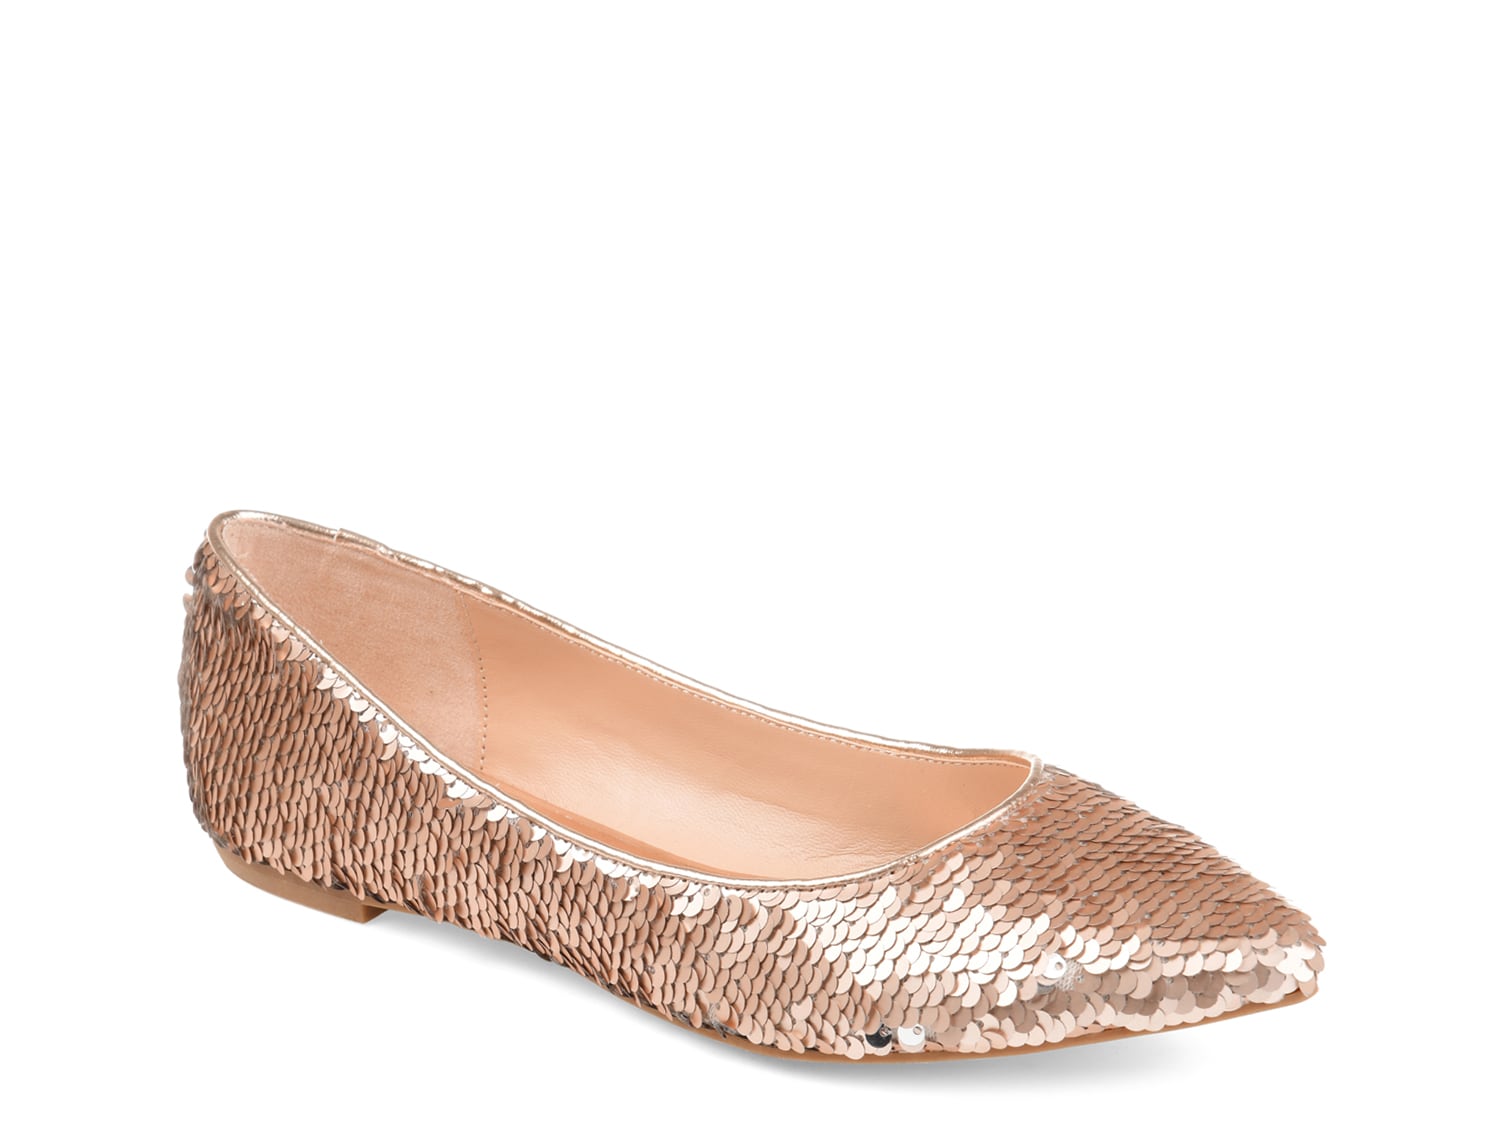 Journee Collection Cree Flat - Free Shipping | DSW